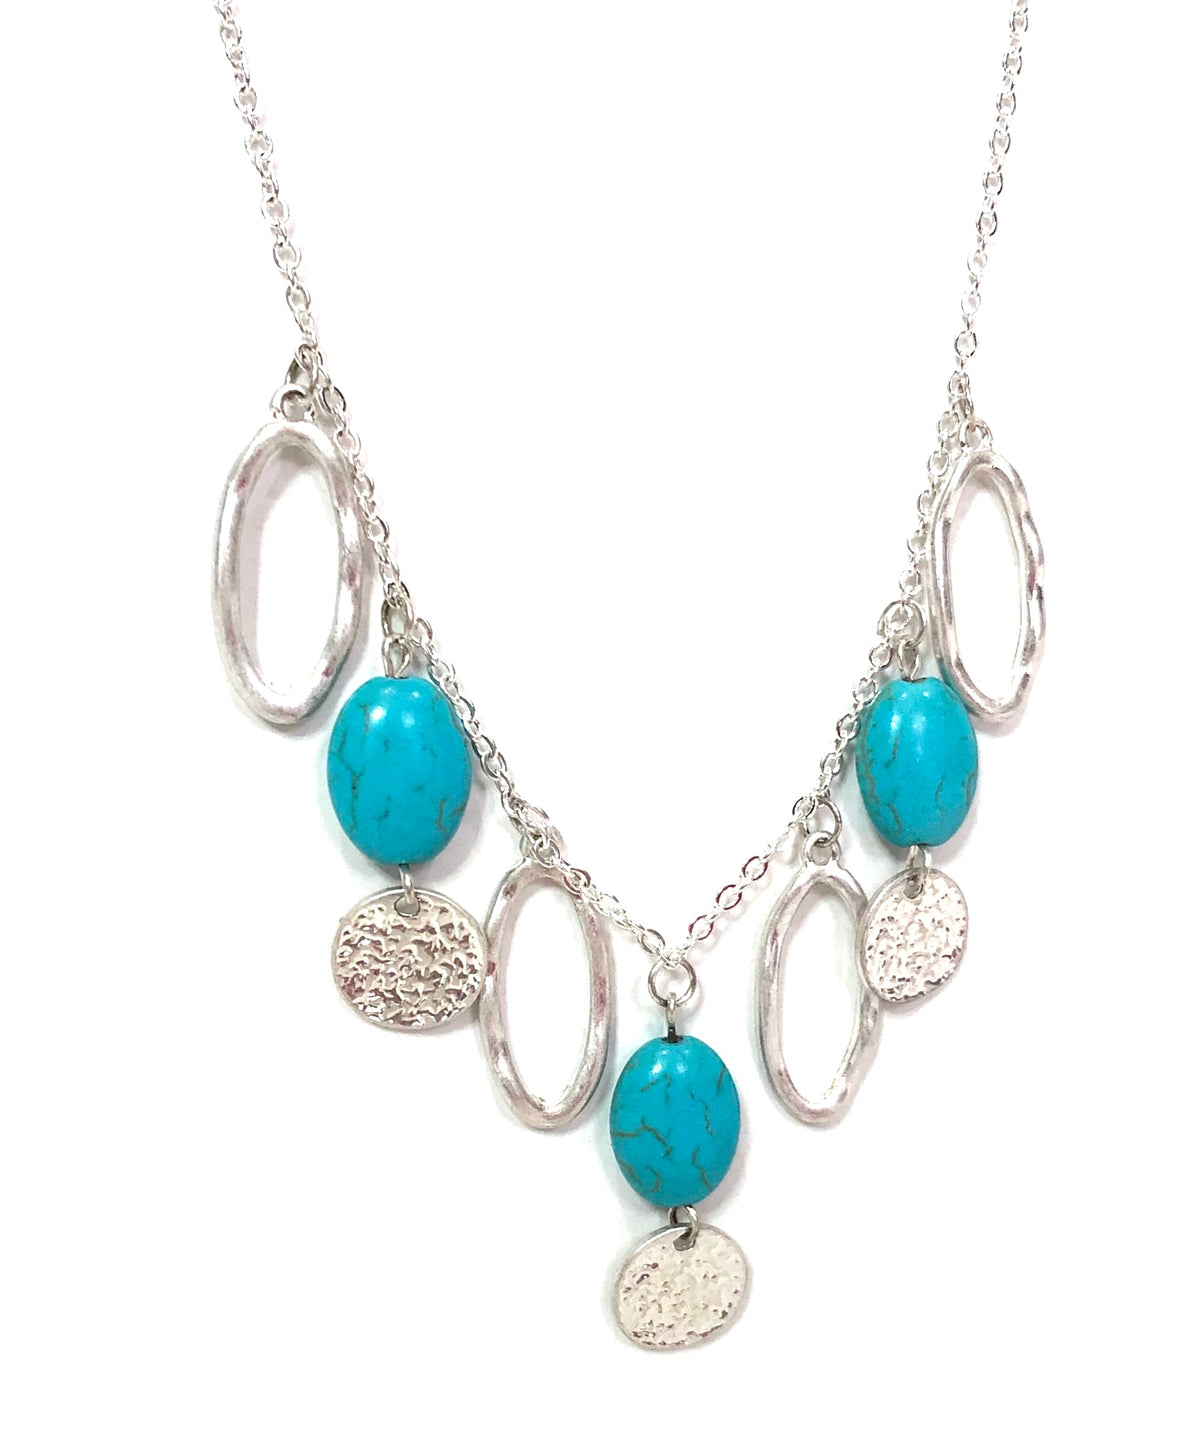 Simply Lovely Turquoise Necklace